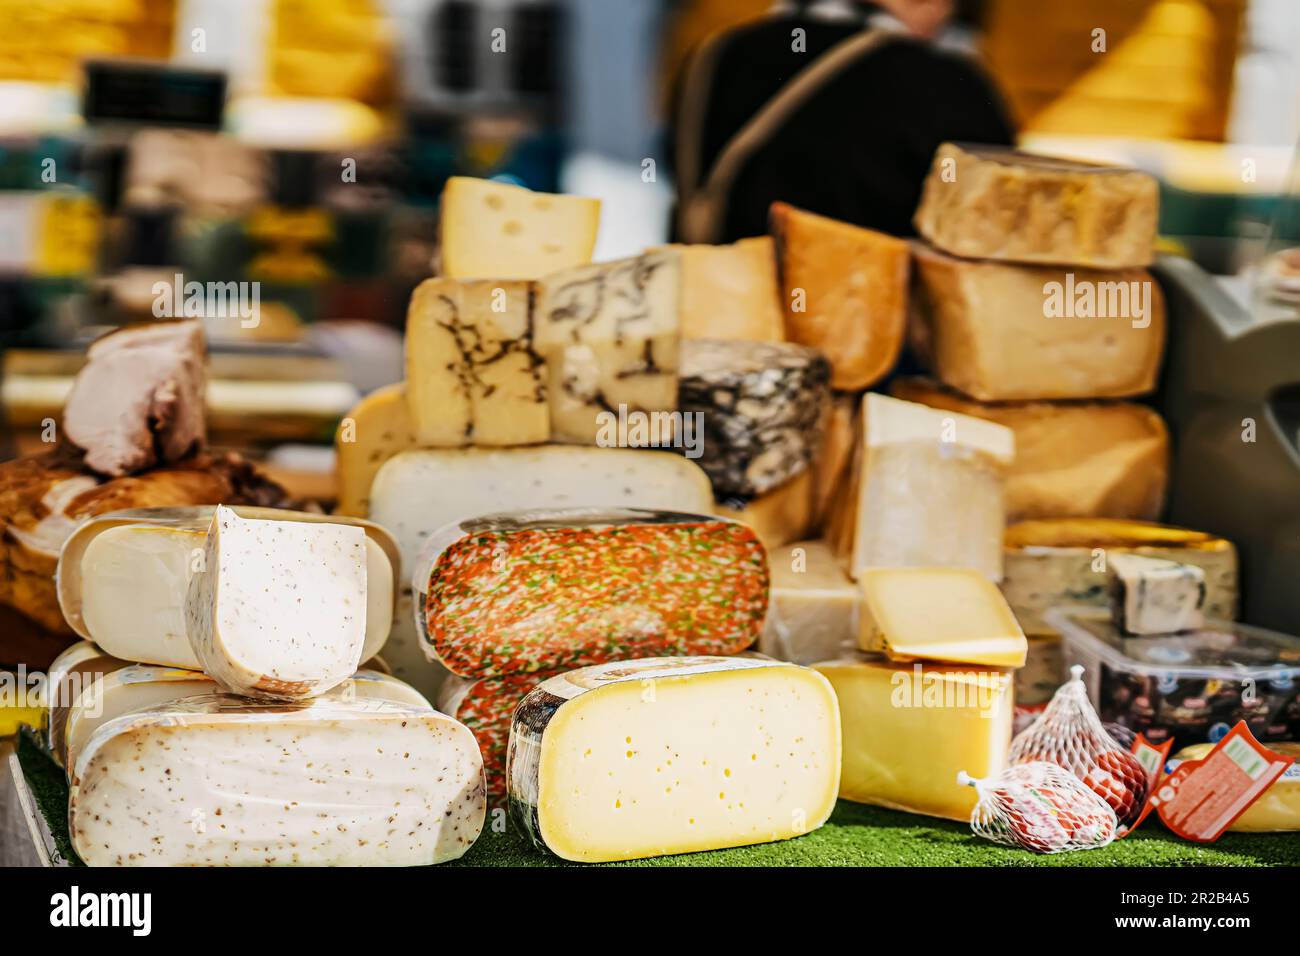 Cheese heads on market counter on market counter, different types and flavors. Gastronomic dainty products, real scene, food market Stock Photo